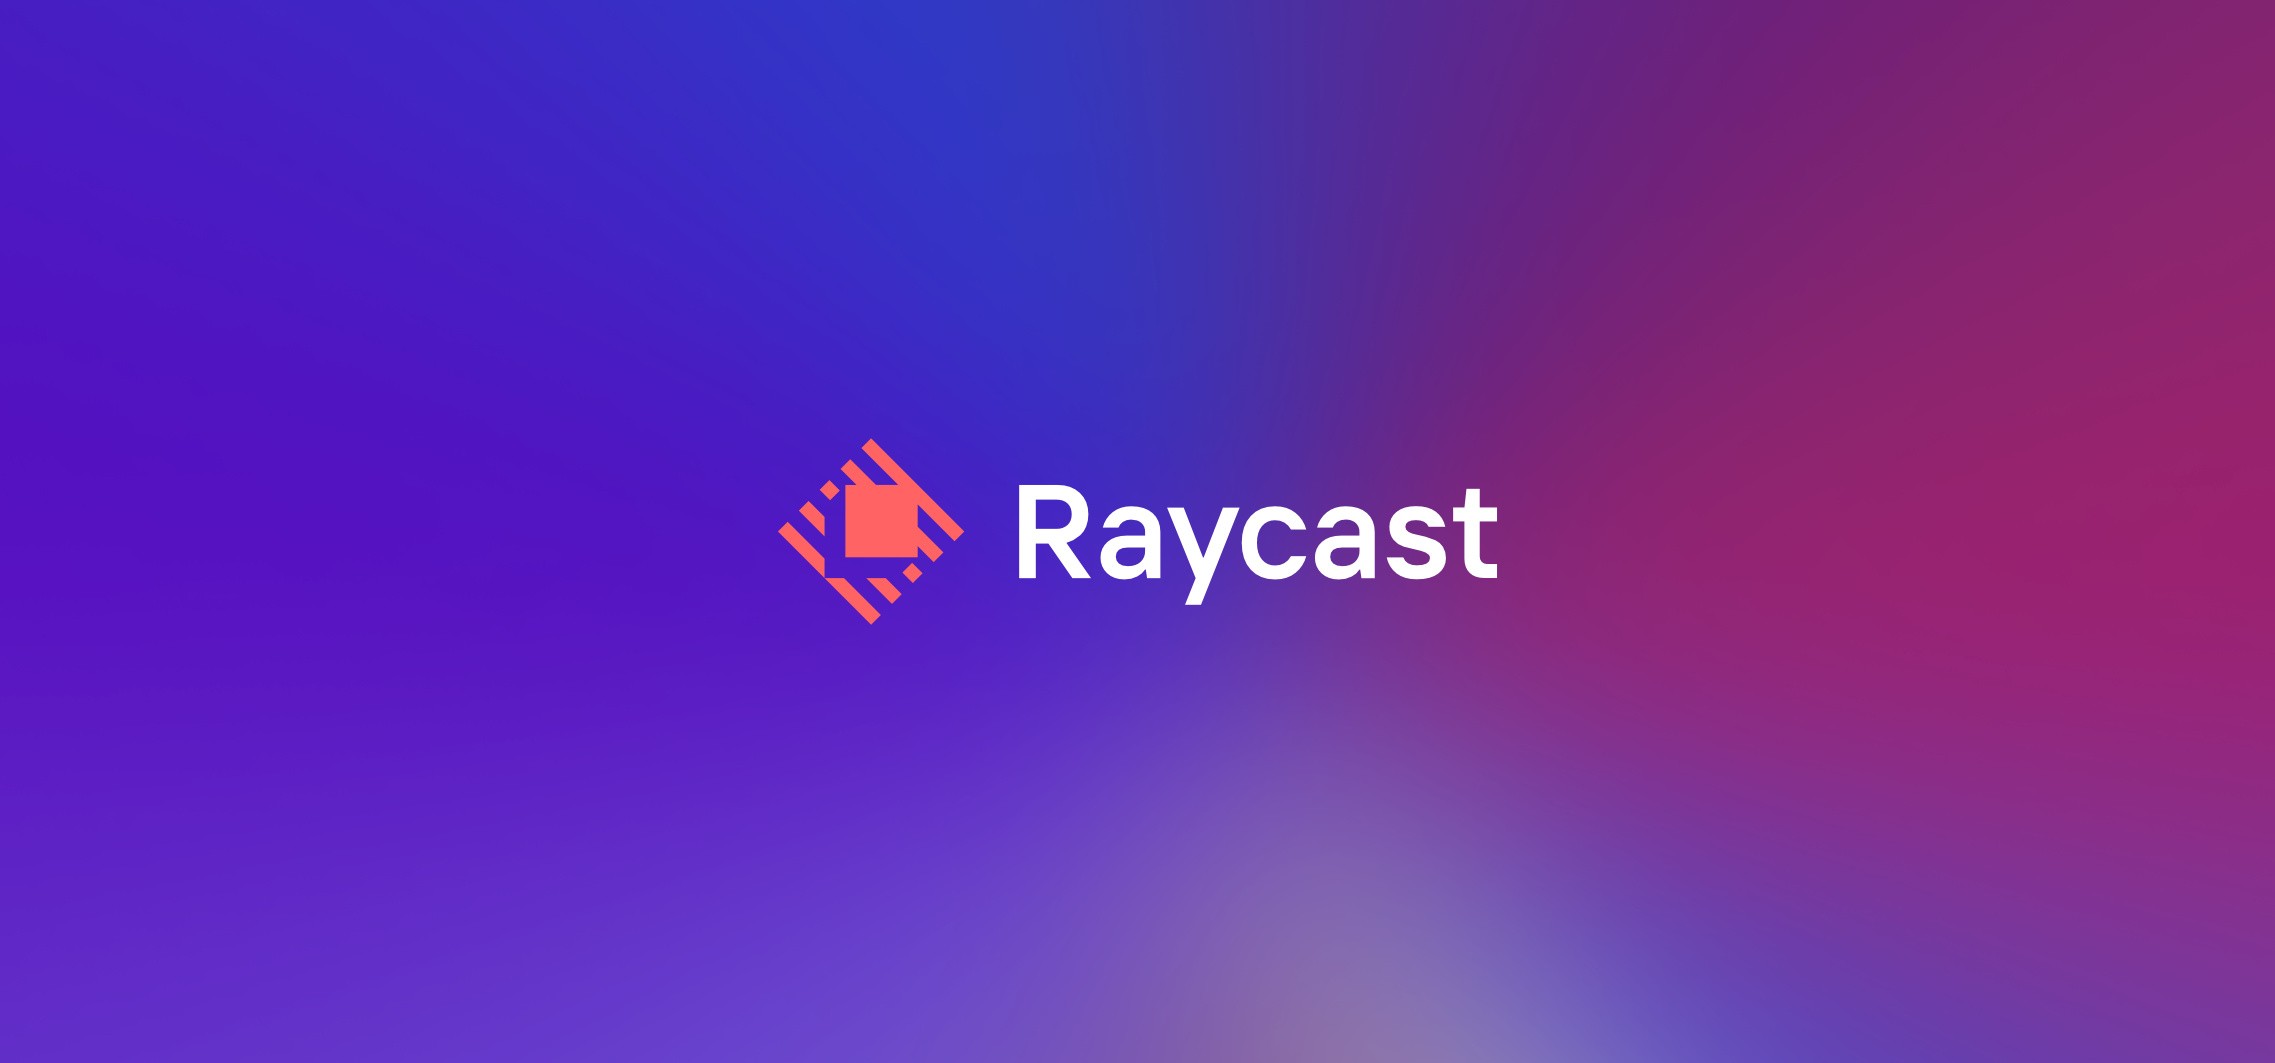 Raycast logo over a multicolor gradient background